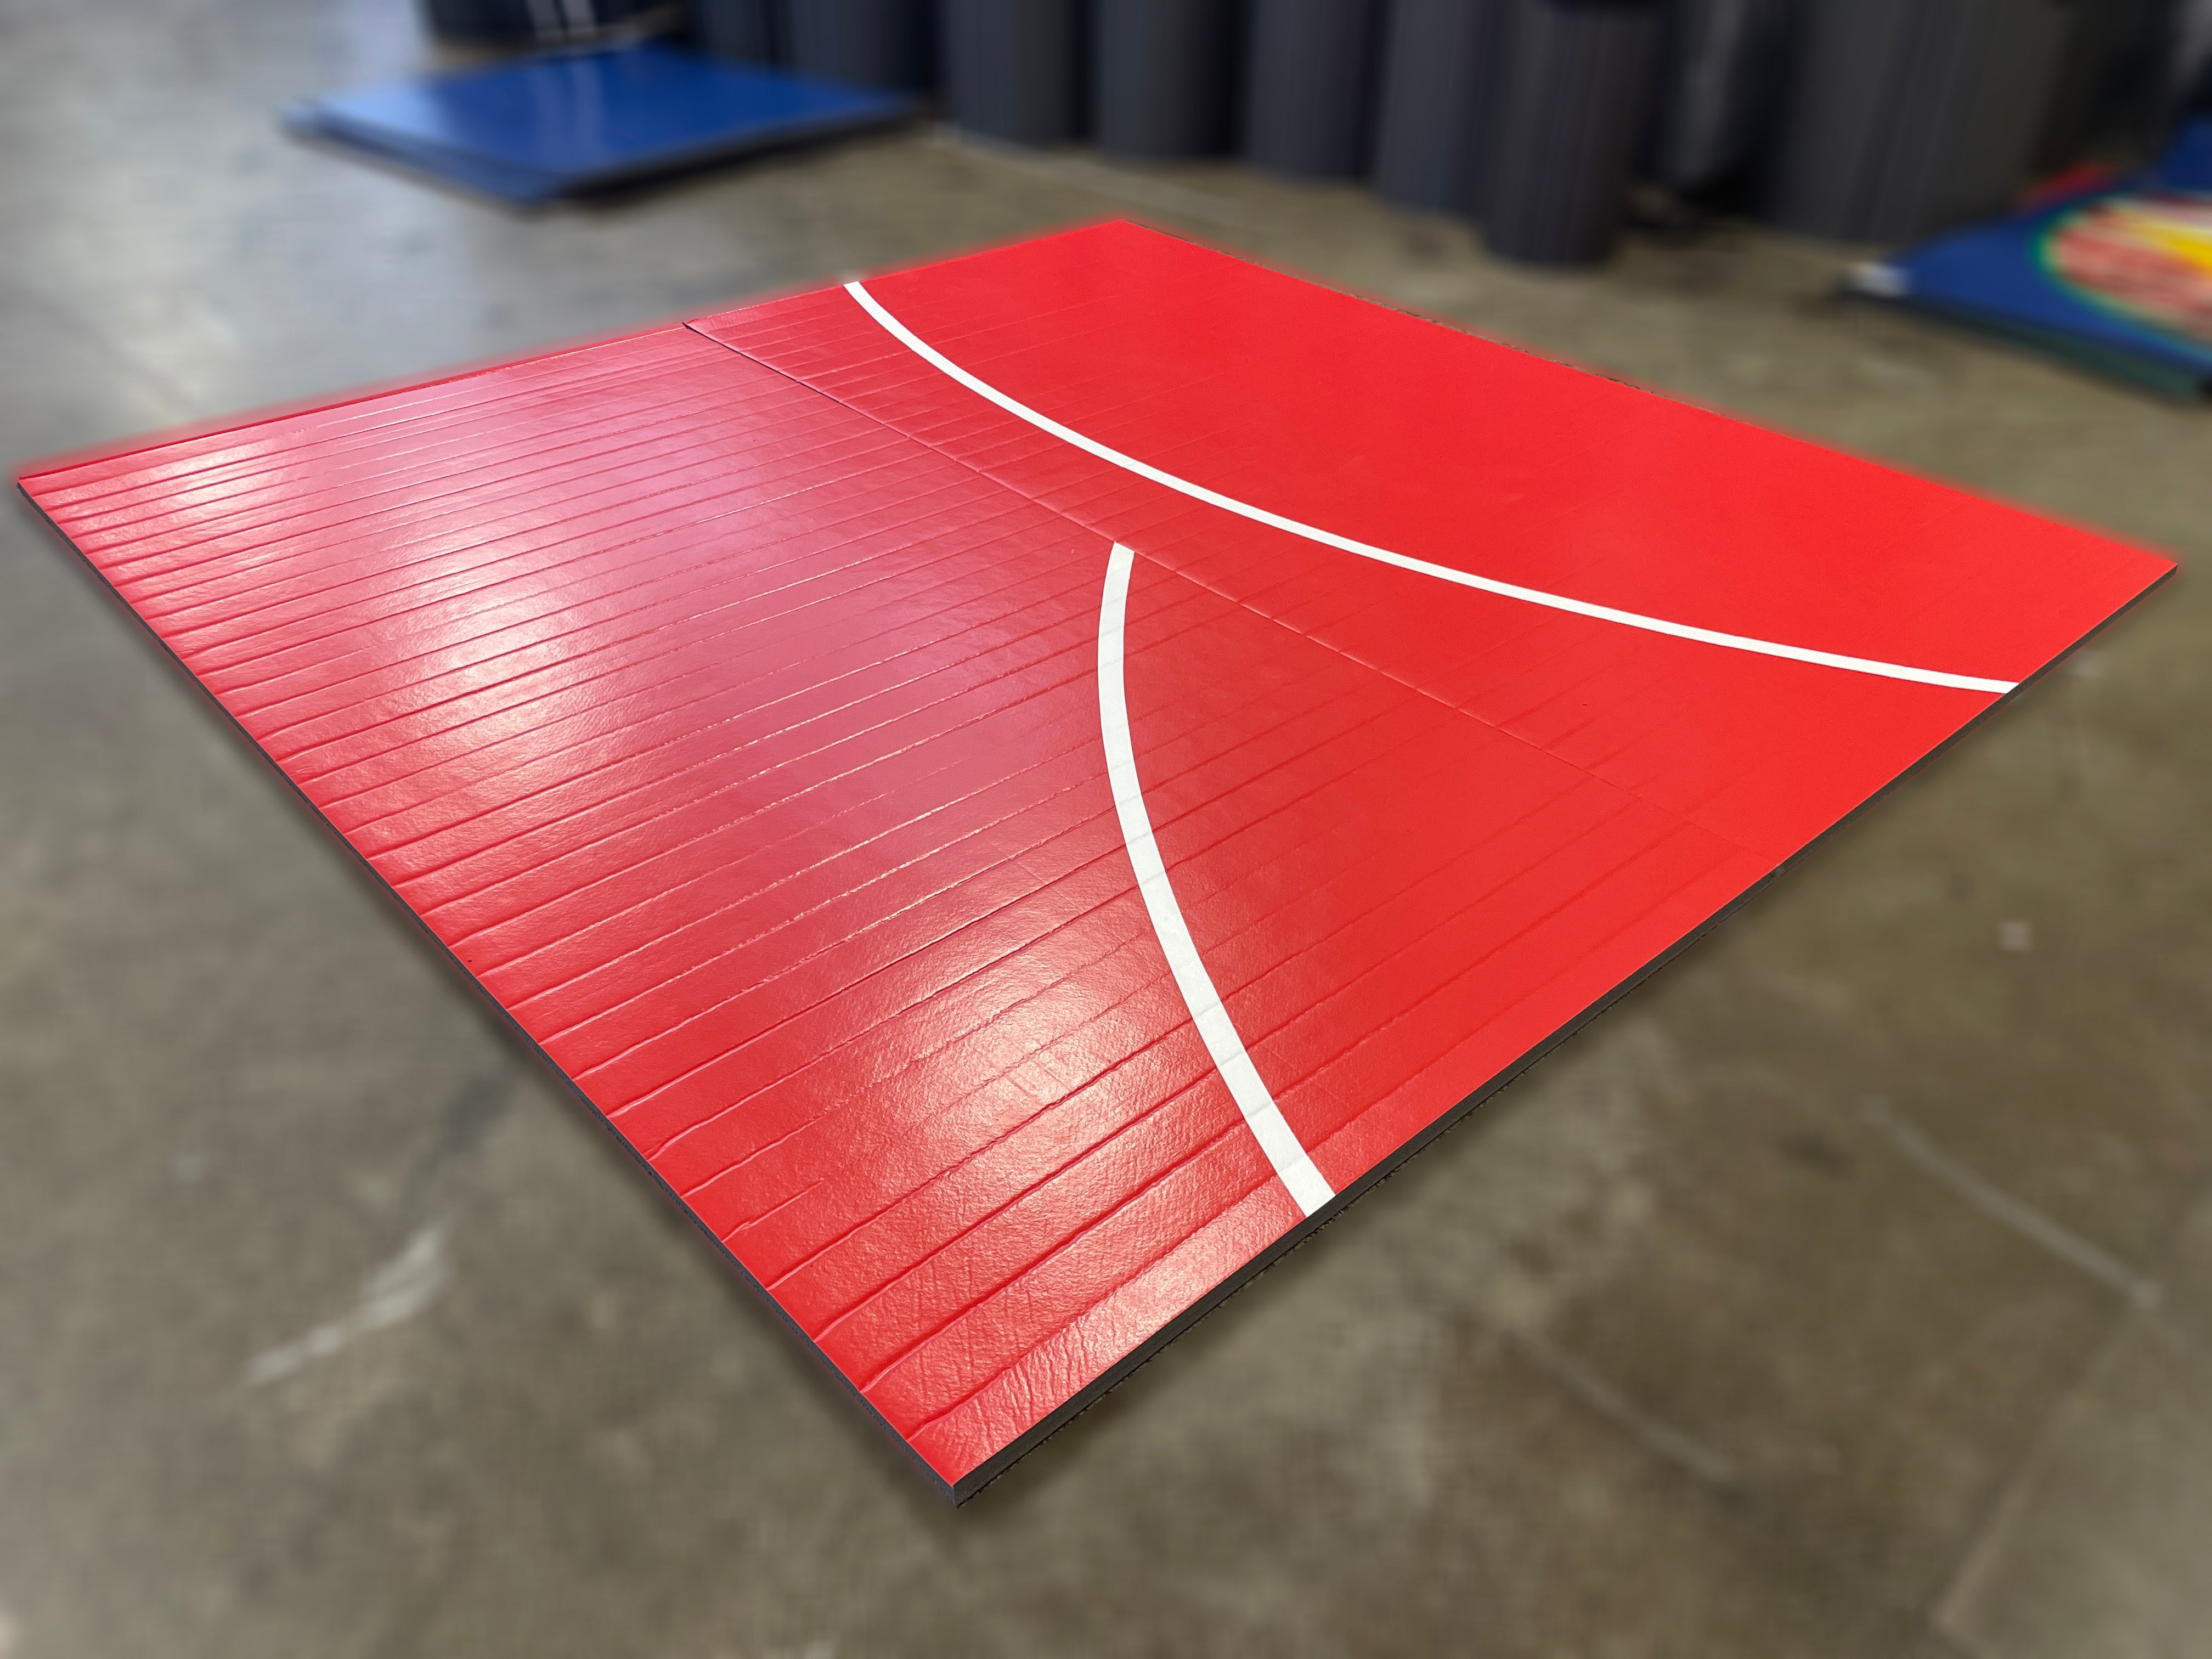 Clearance Wrestling Mat 12' x 12' x 1 3/8" Roll-Up Mat Red with White